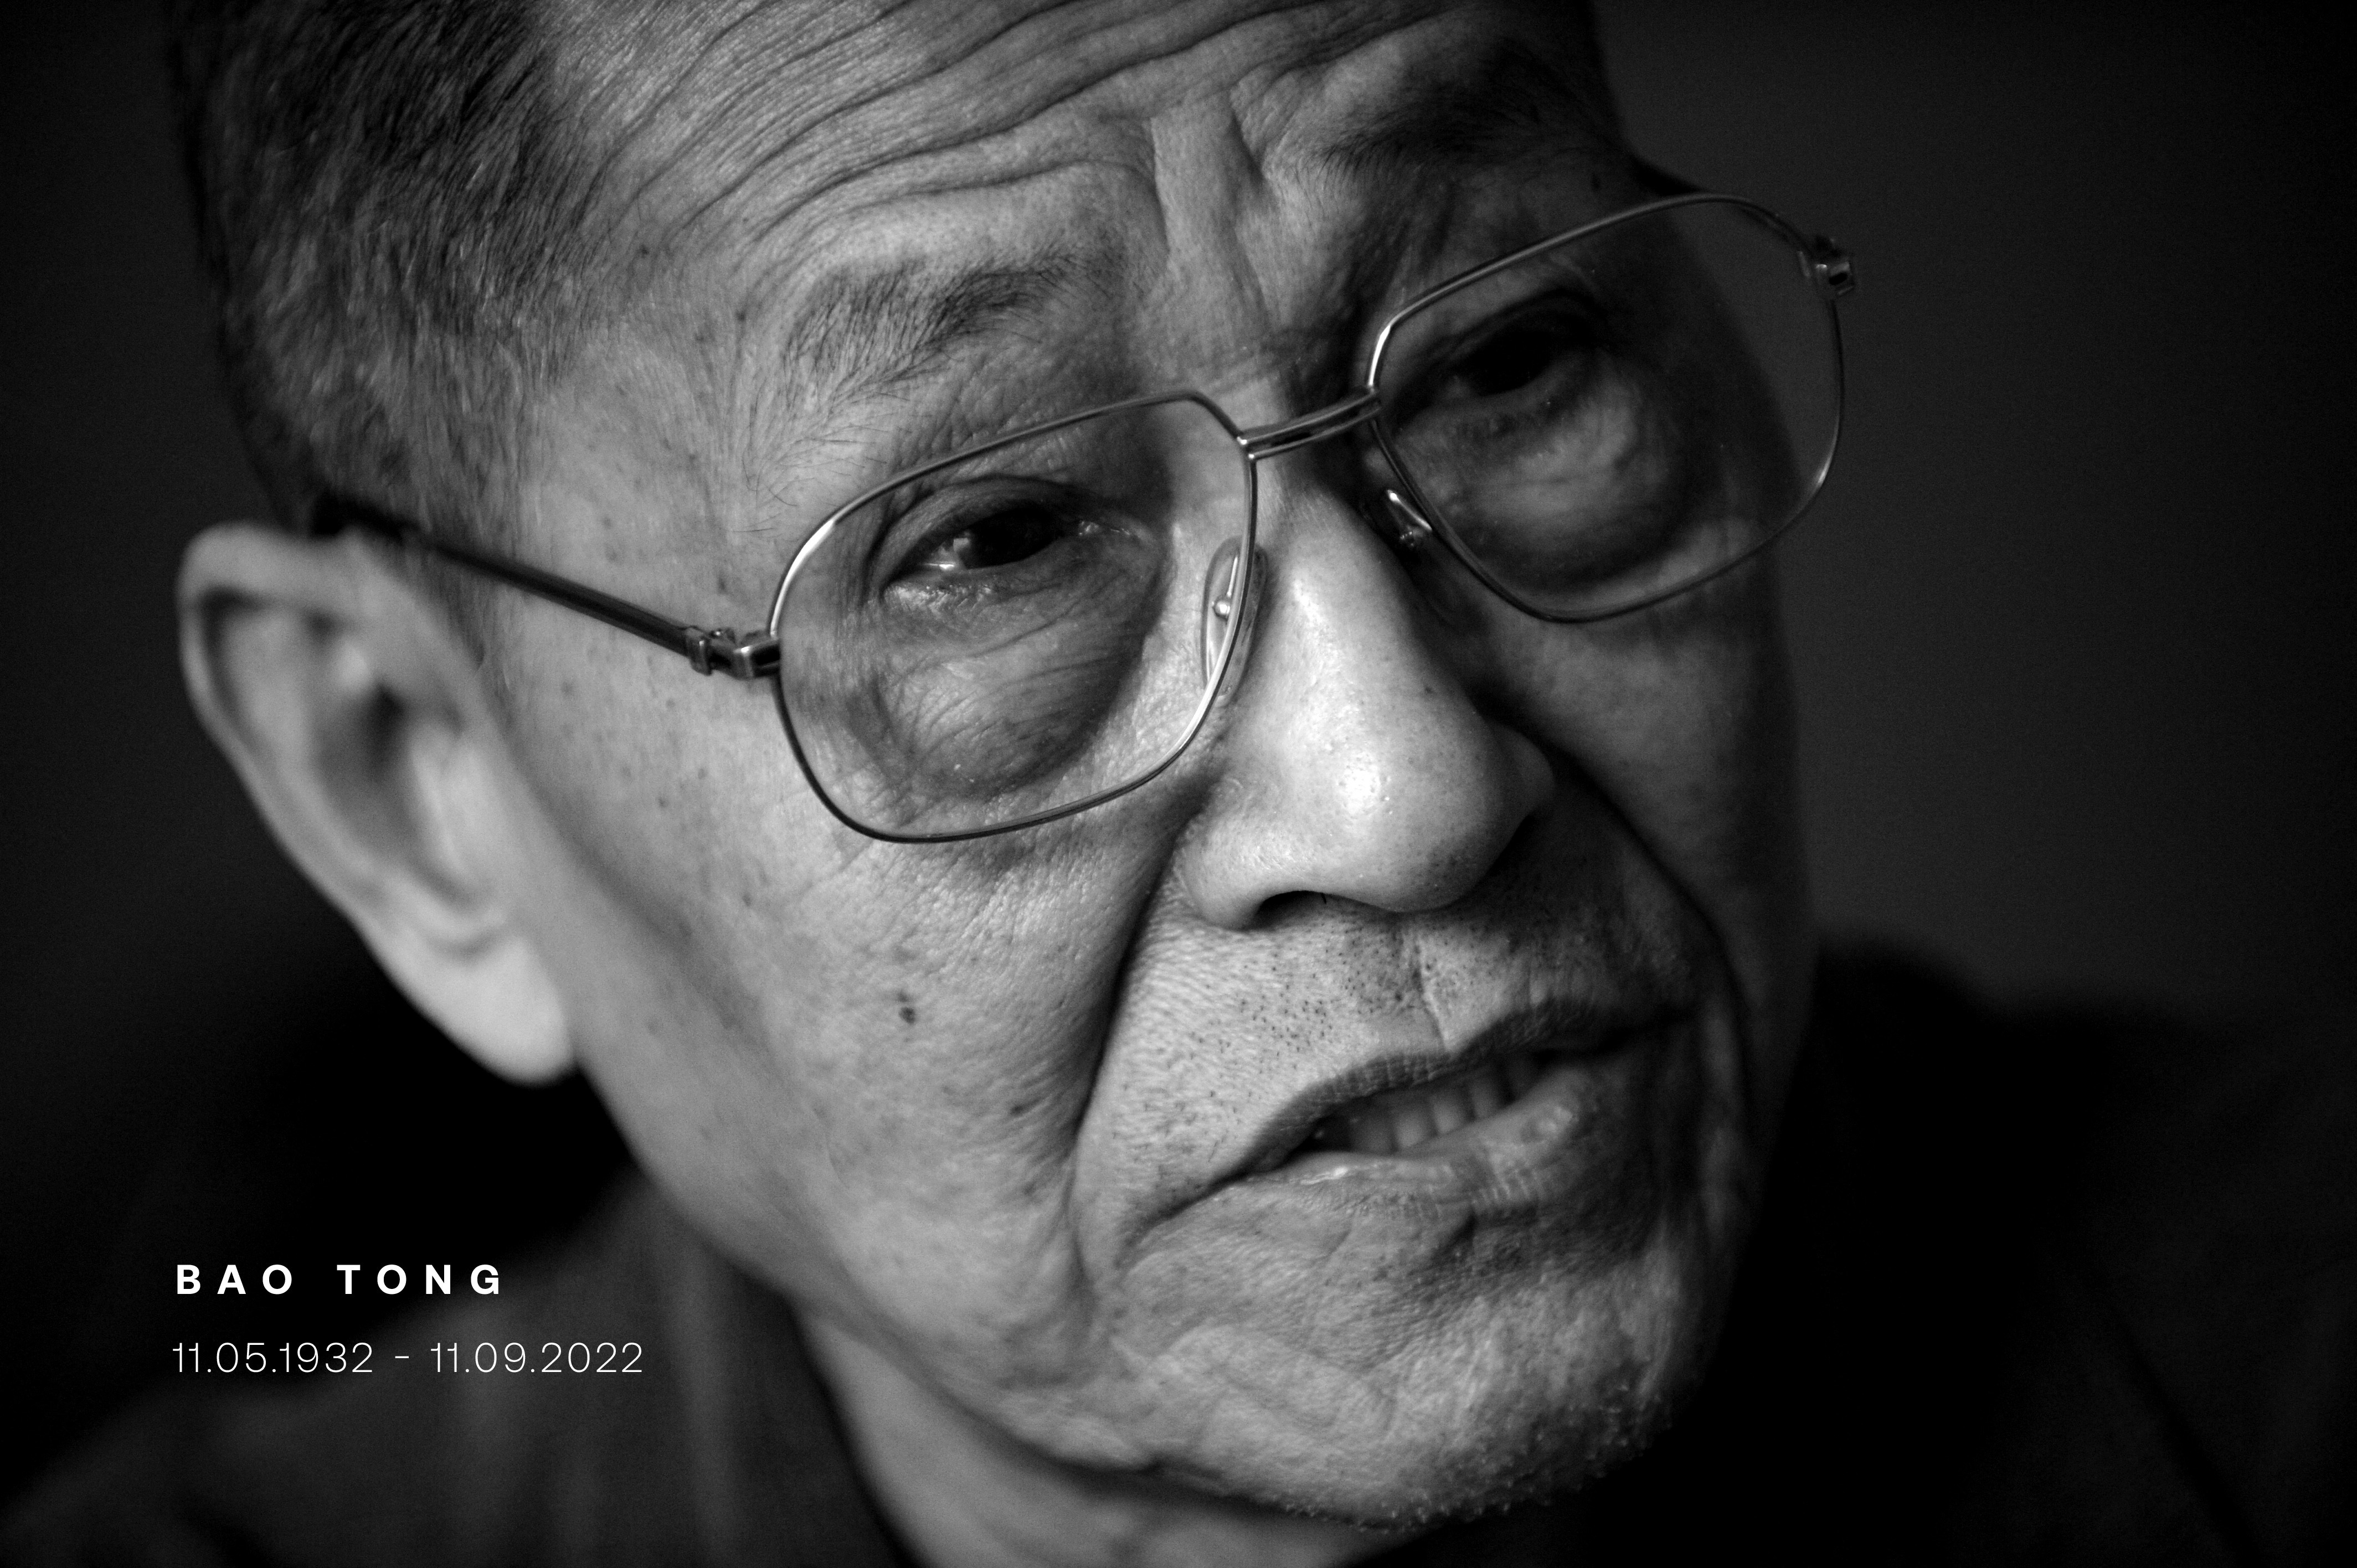 China Chinese Monochrome Men Bao Tong Writers Journalist Face Glasses Depth Of Field Photography Tri 4256x2832